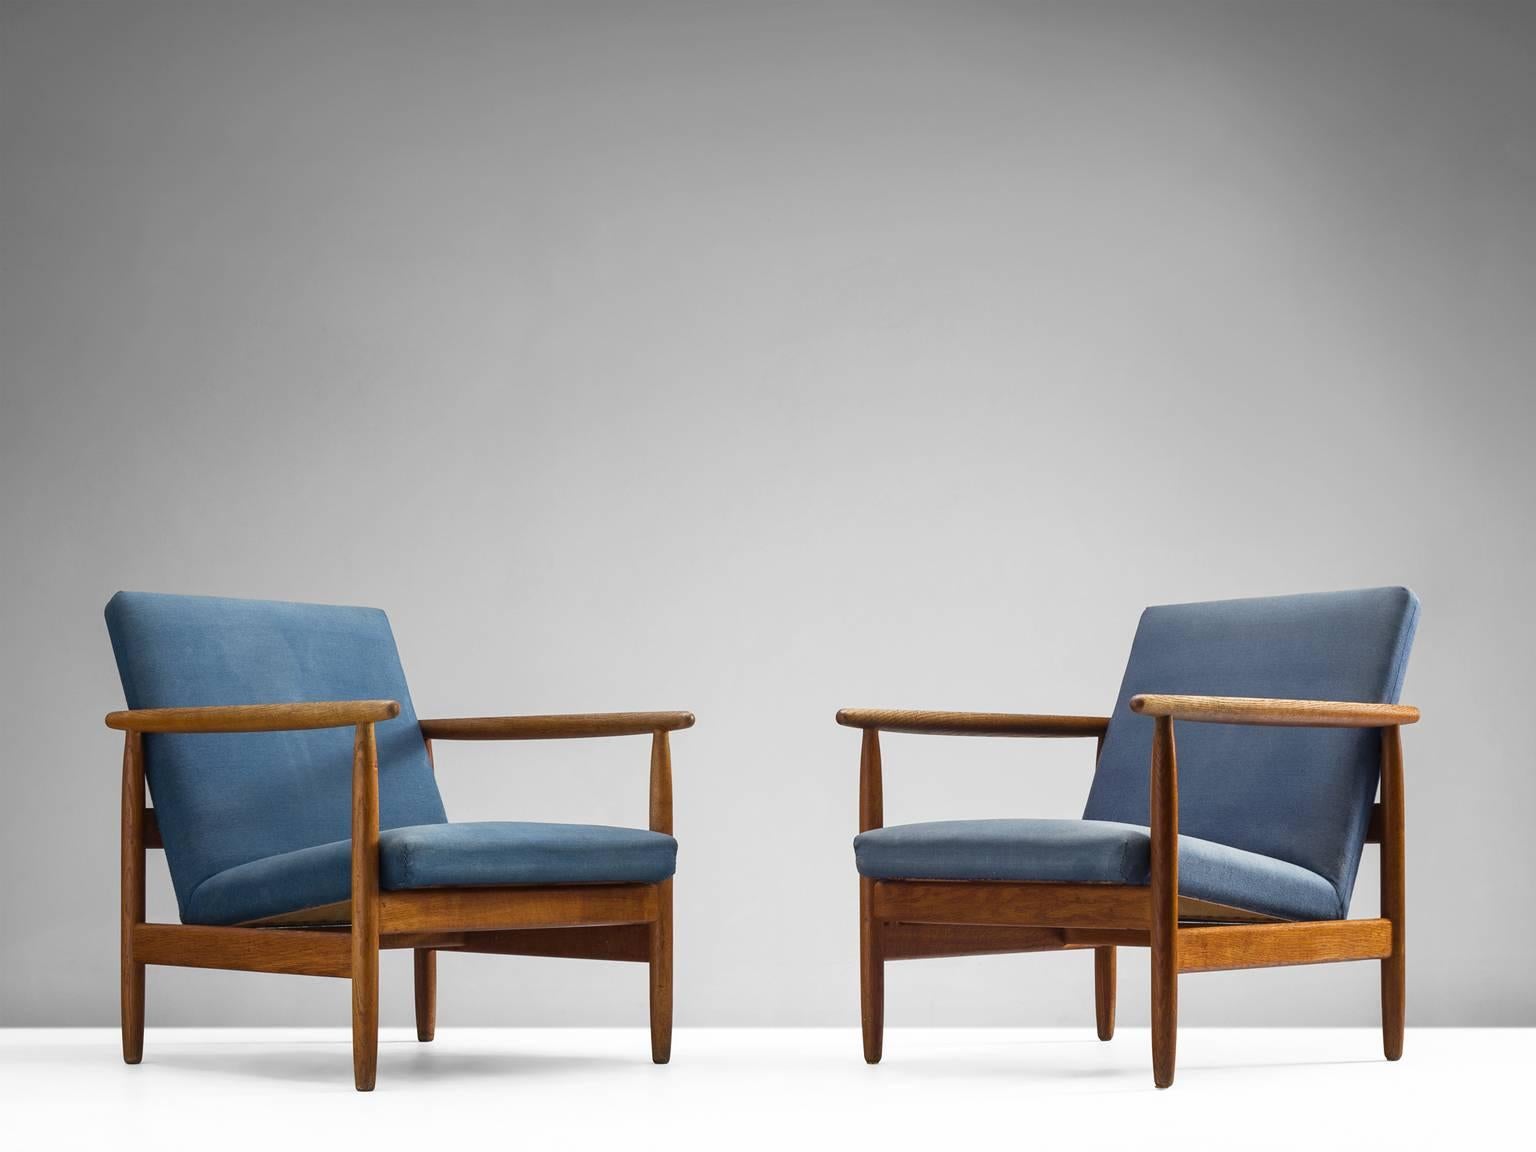 Pair of teak armchairs in original blue fabric, Denmark, 1960s.

The basic design of the frame is well executed. The solid teak has a warm expression and gives the chairs a friendly appearance. The chairs are well proportioned and provide great